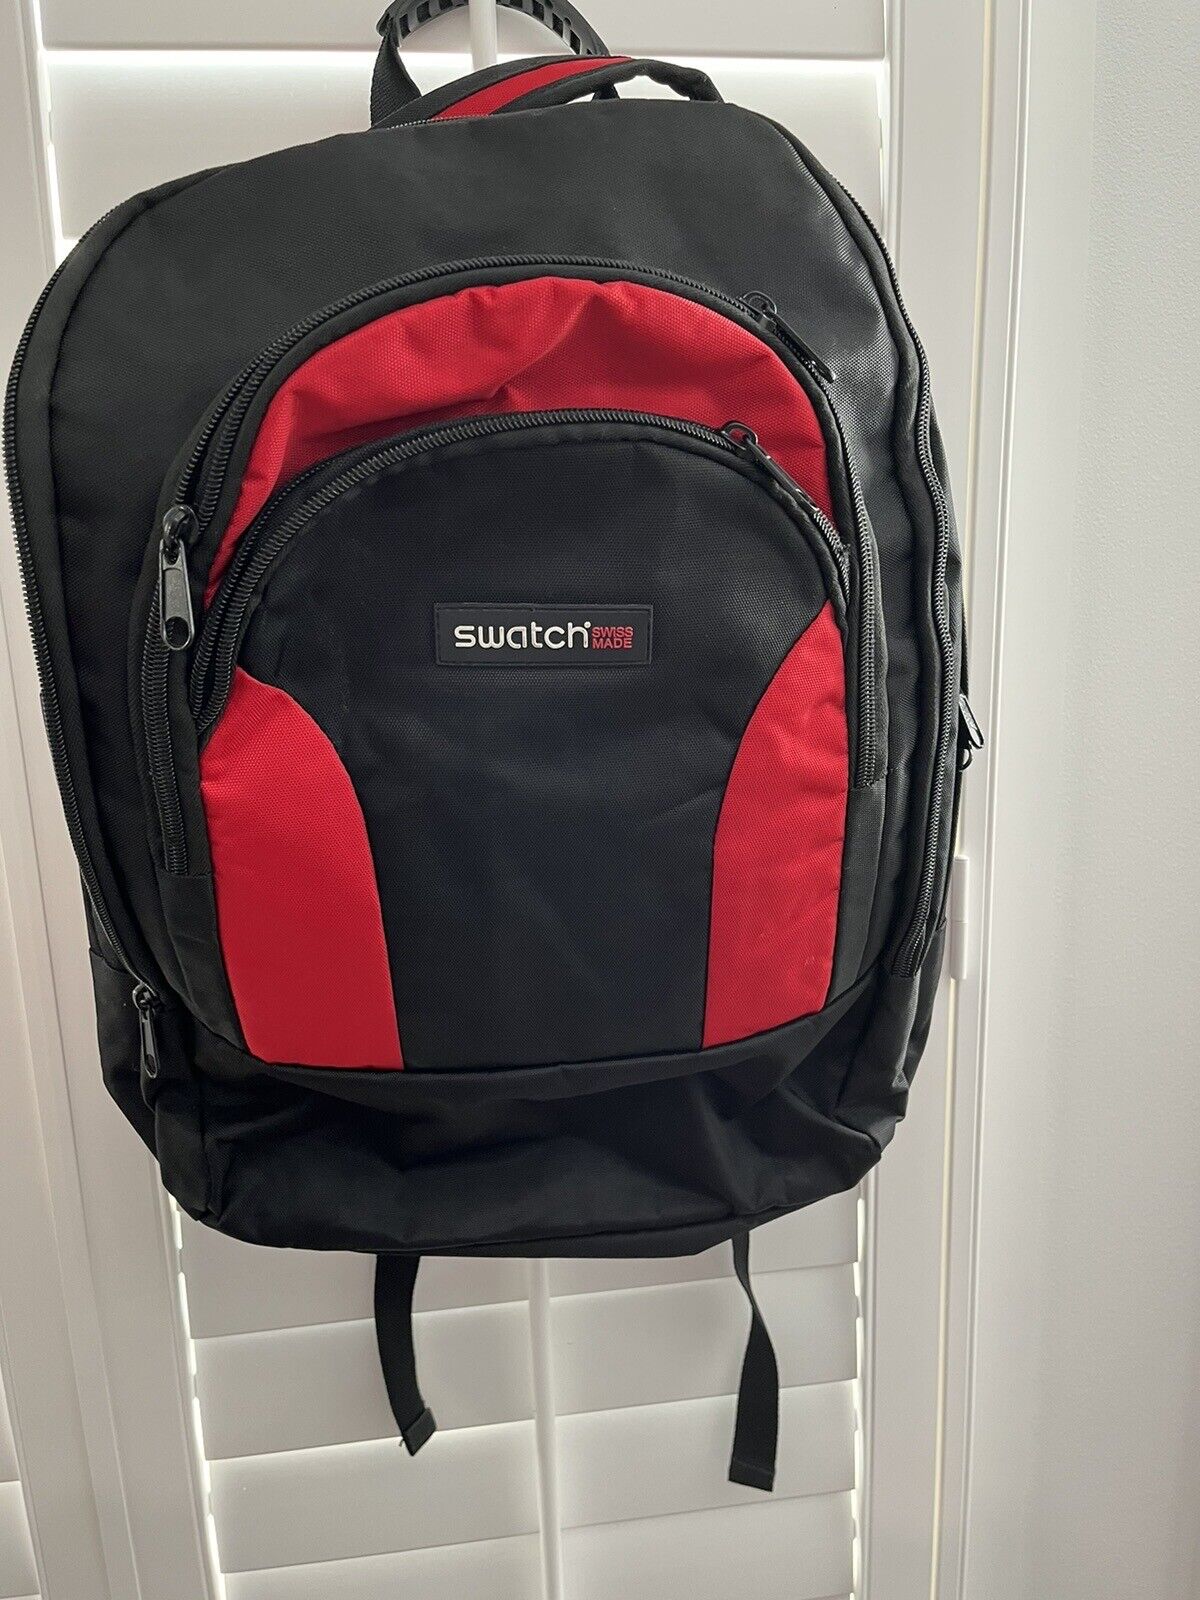 Swatch Black And Red Backpack With Laptop Compartment And Many Pockets 20x15x5